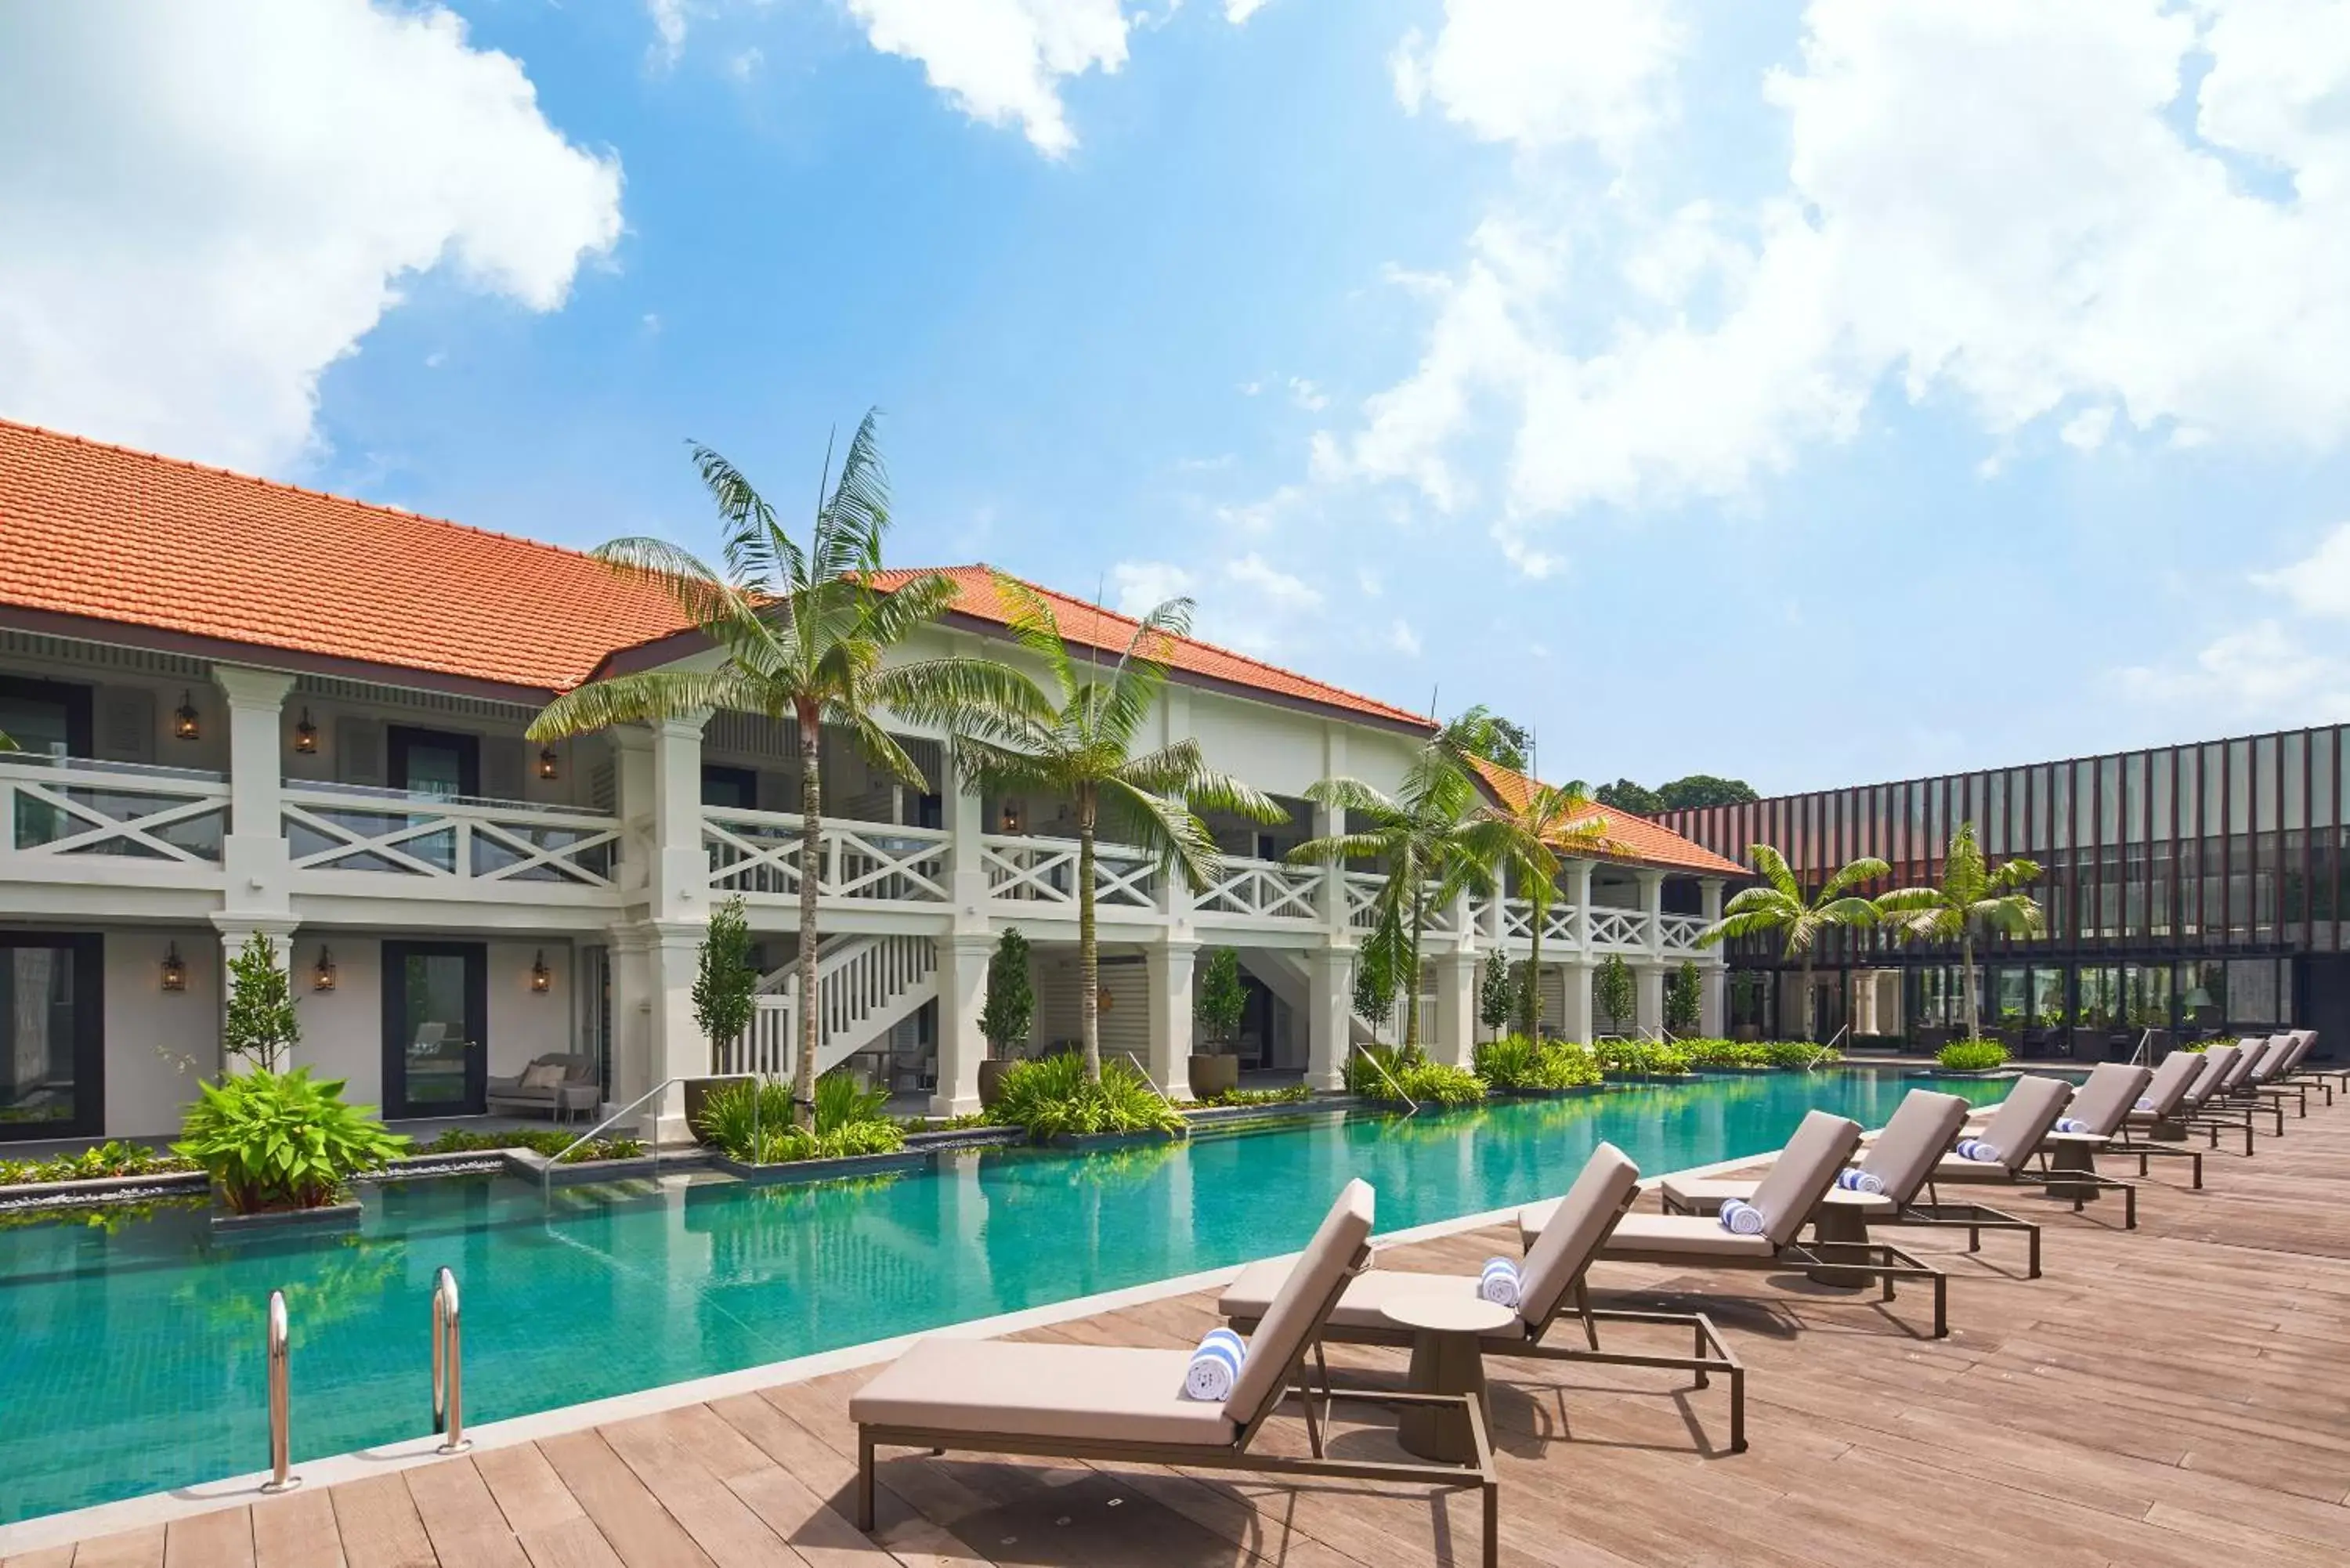 Property Building in The Barracks Hotel Sentosa by Far East Hospitality